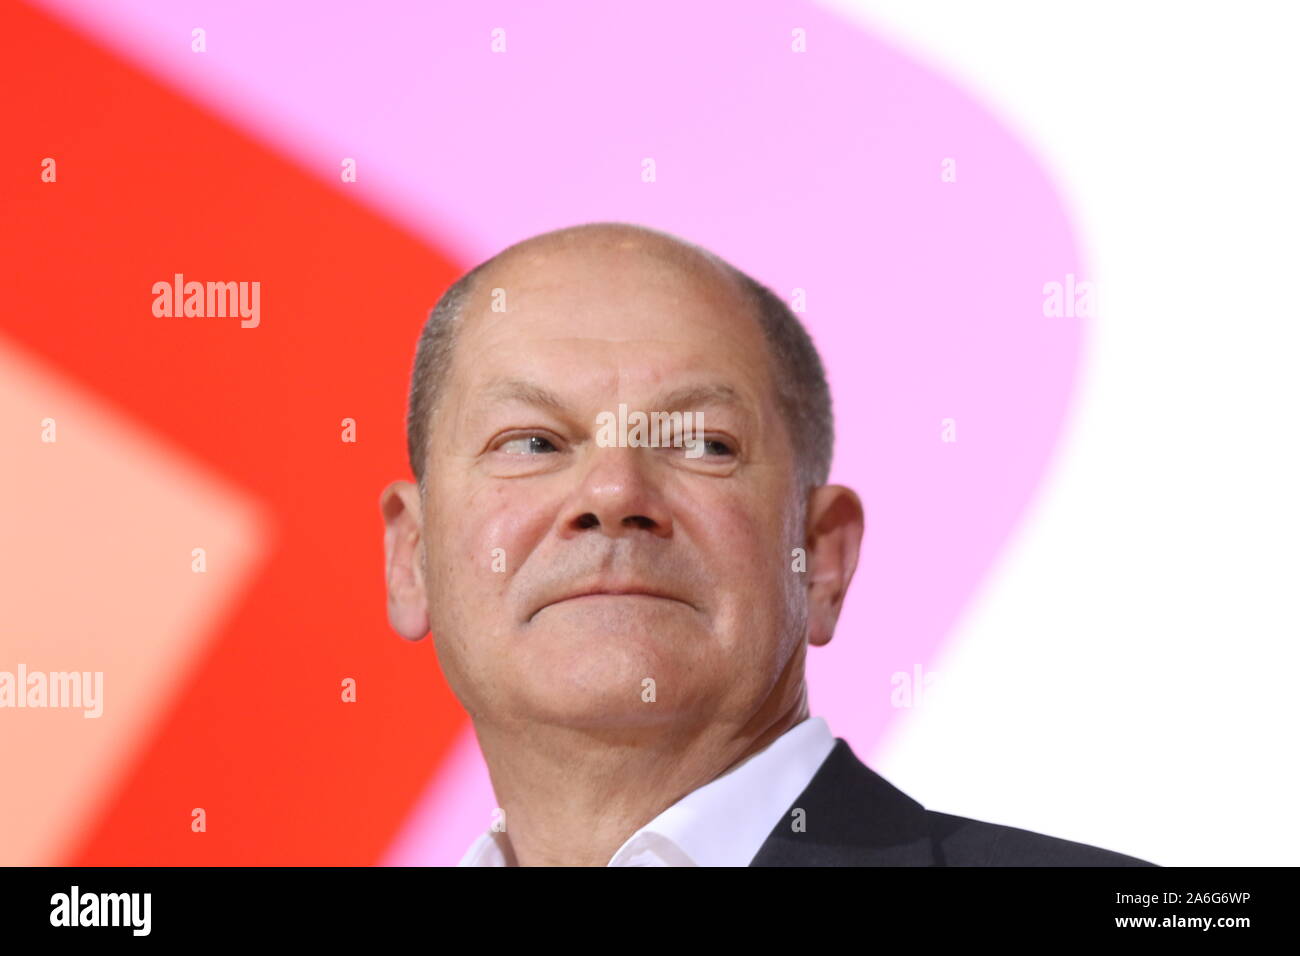 Germany, Berlin, 10/26/2019. Olaf Scholz in the SPD headquarters in Berlin. The SPD members elect Federal Finance Minister Olaf Scholz and Klara Geywitz just ahead of Norbert Walter-Borjans and Saskia Esken for the SPD presidency. The race for the SPD presidency goes into the runoff election in November: the two candidates will then be elected at the party congress. Stock Photo